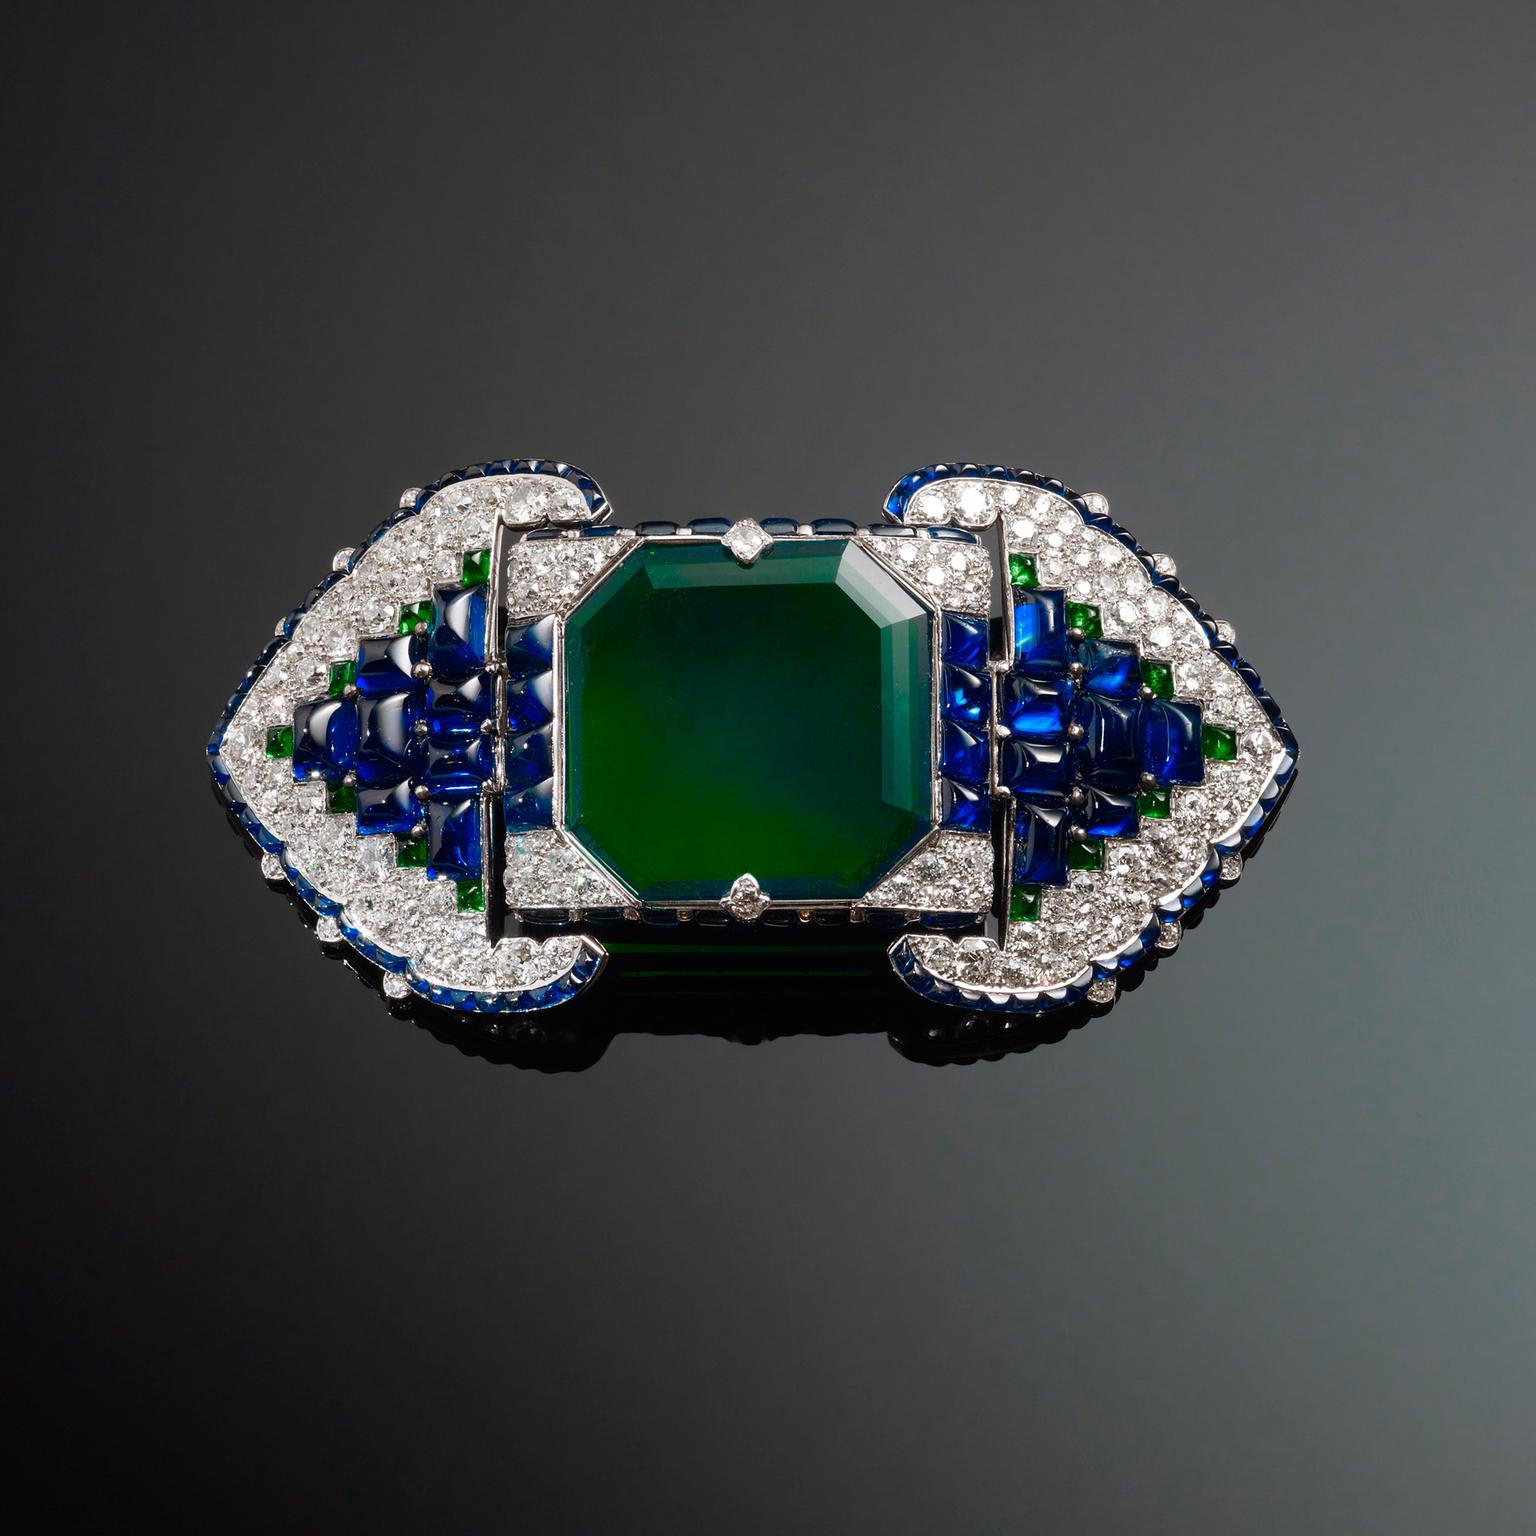 Cartier brooch with emeralds, sapphires and diamonds